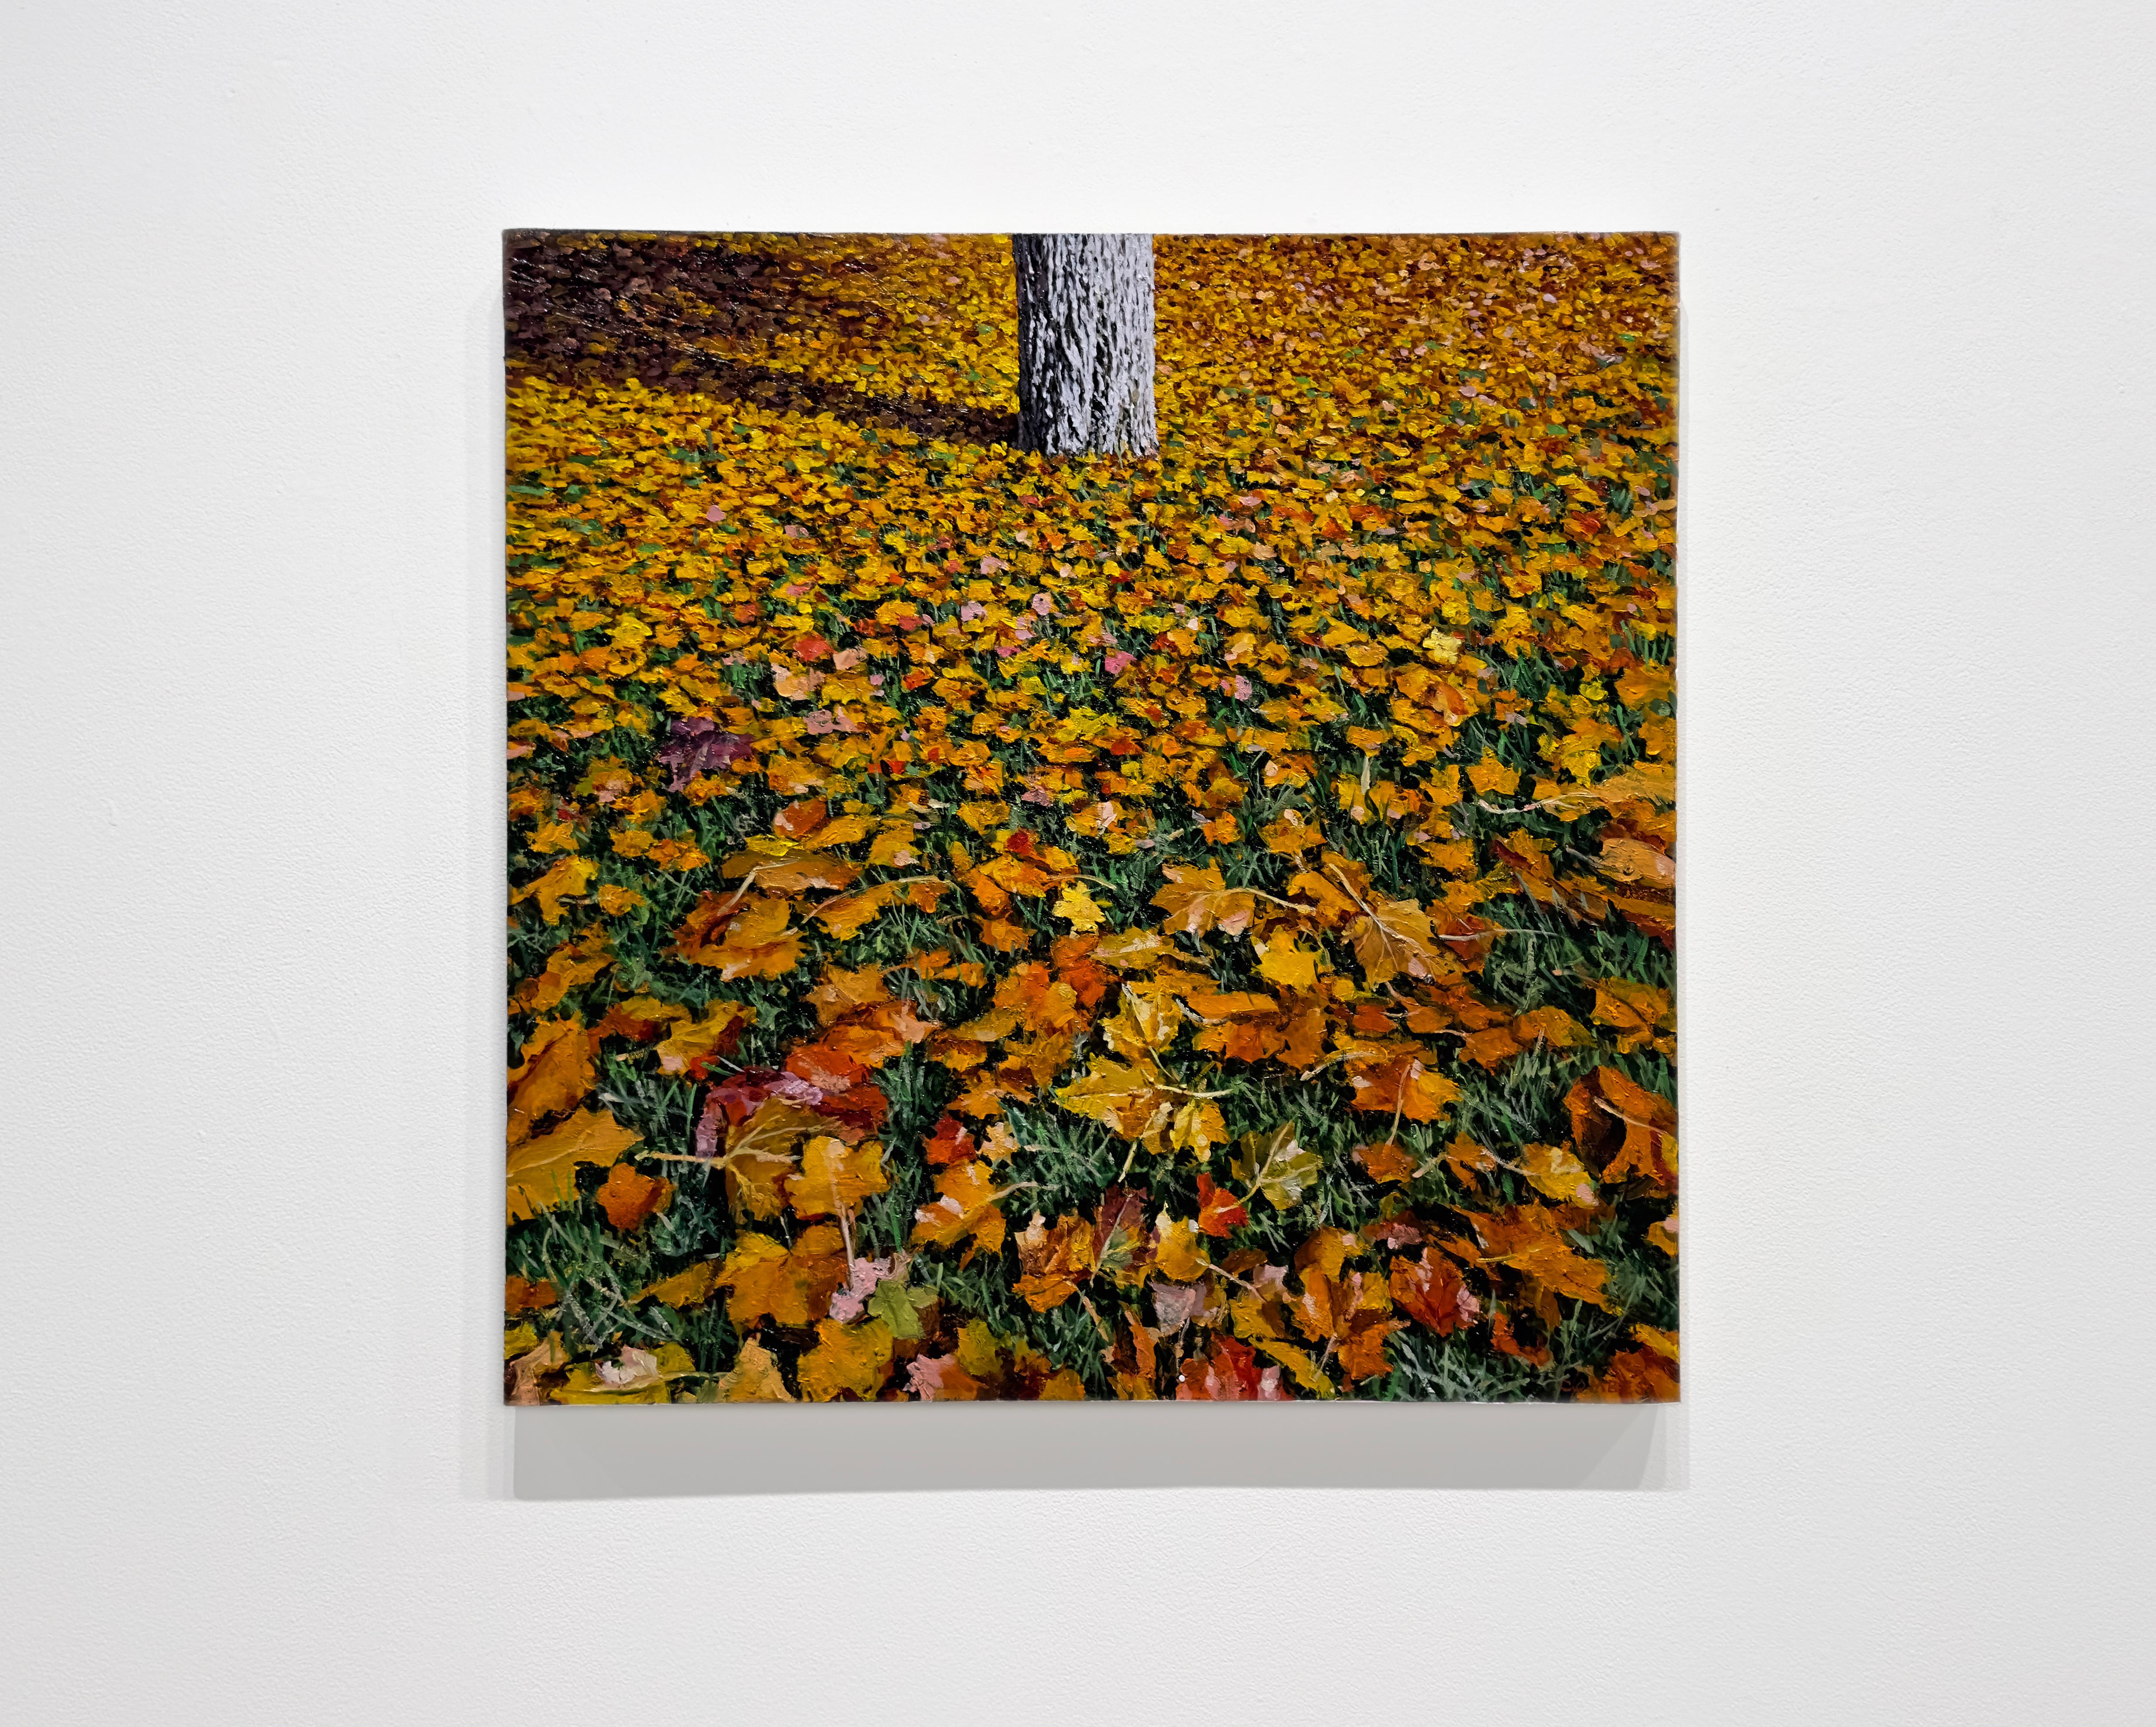 FALLEN LEAVES CENTRAL PARK - New York City, Realism,  Autumn, Leaves - Painting by Richard Combes